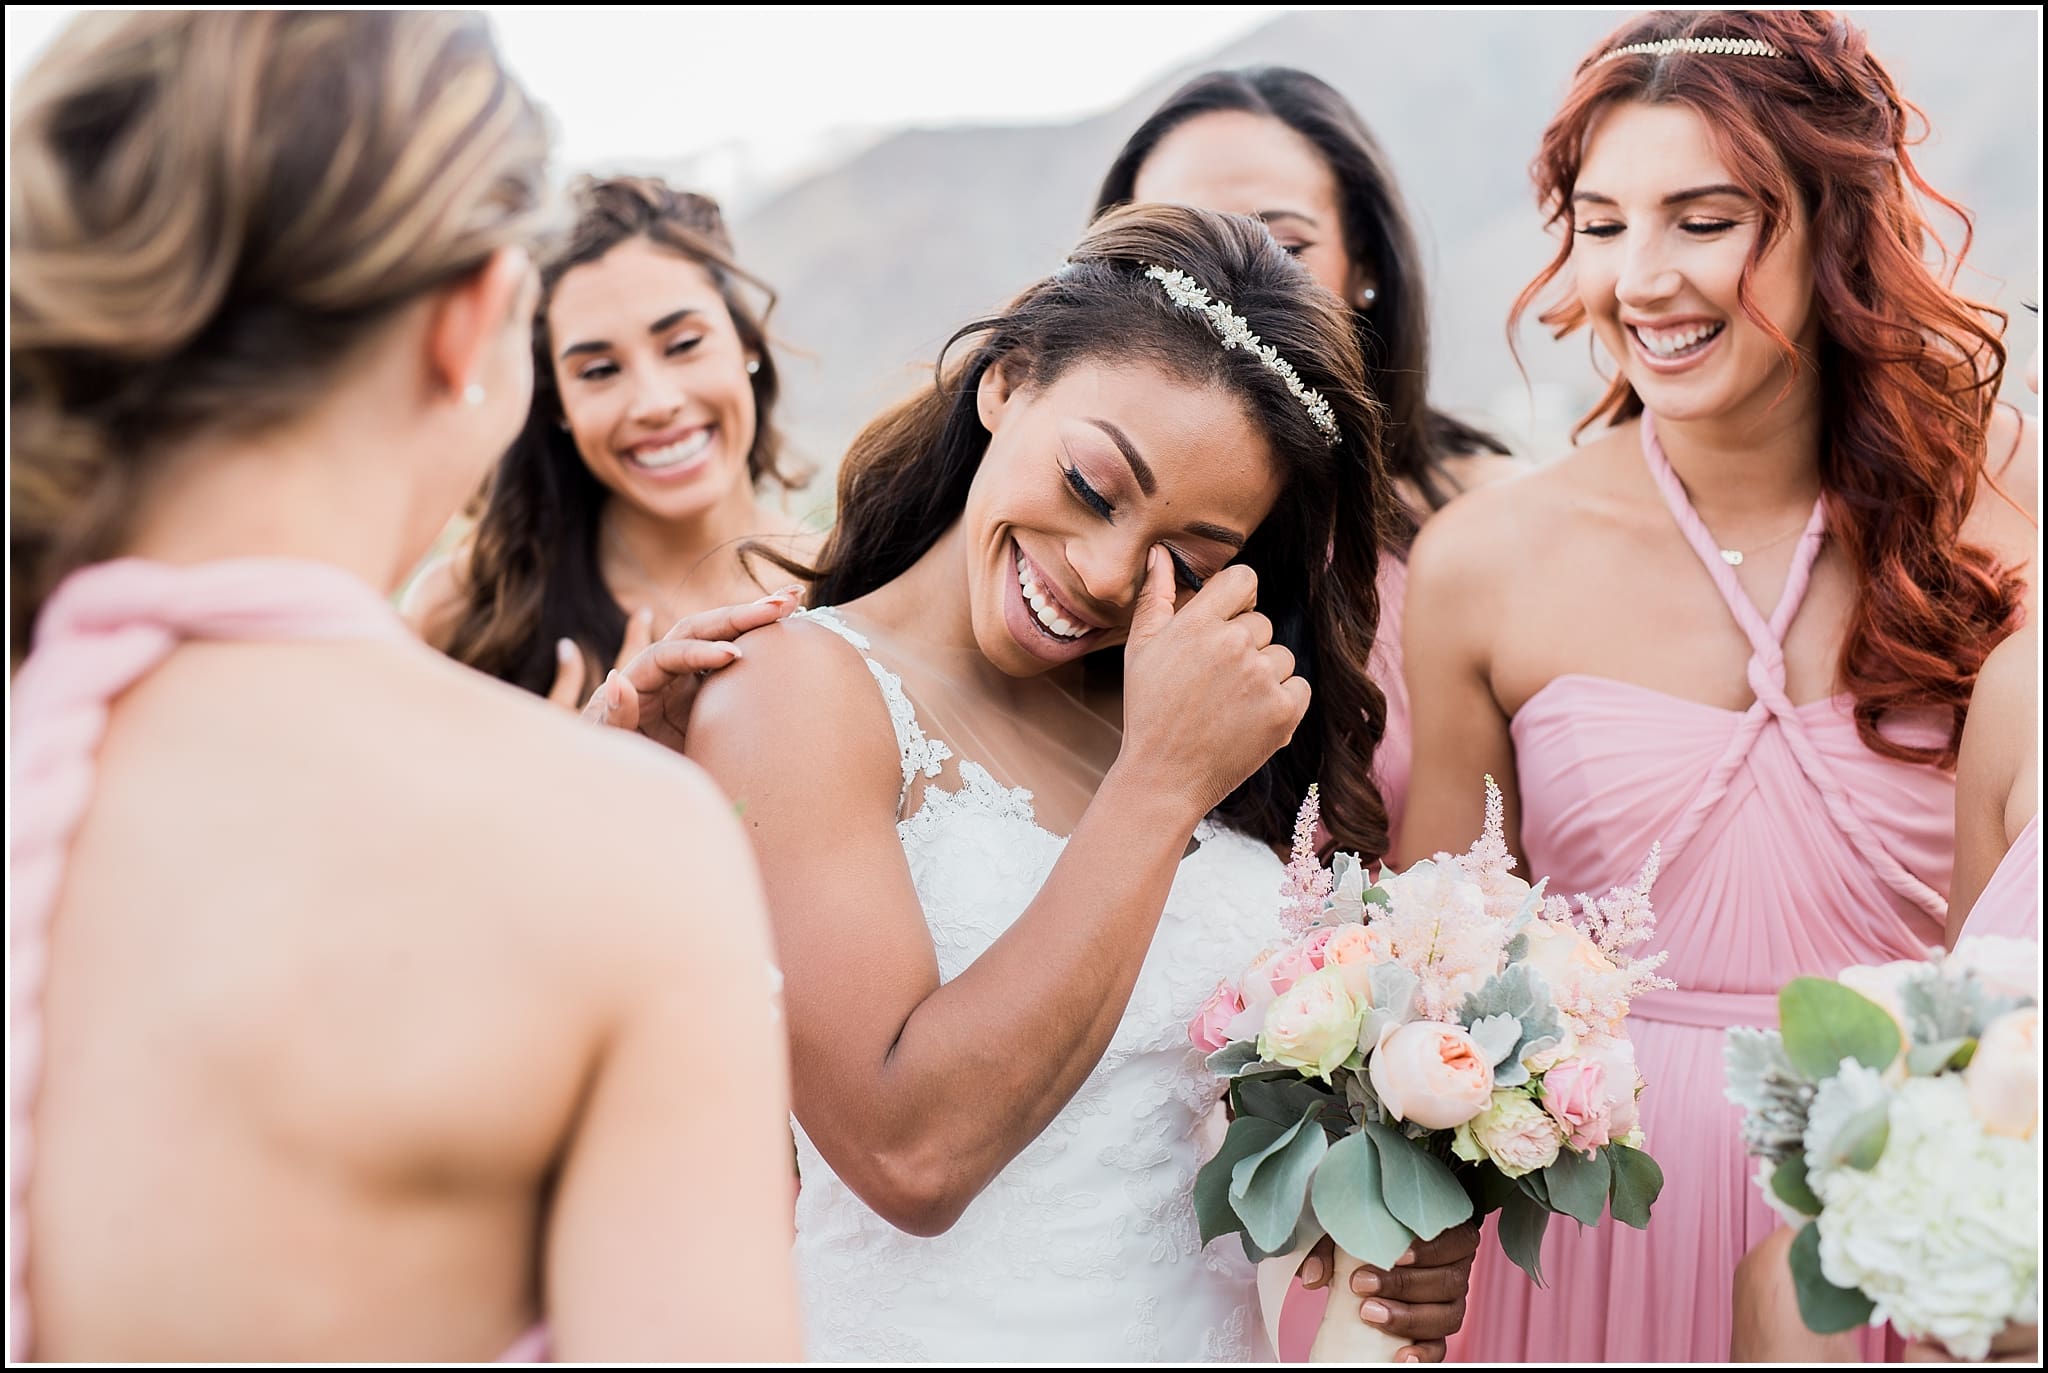  favorite wedding images 2016, wedding photos from 2016, our favorite wedding photos, praying for bride, pre ceremony getting ready portraits, 